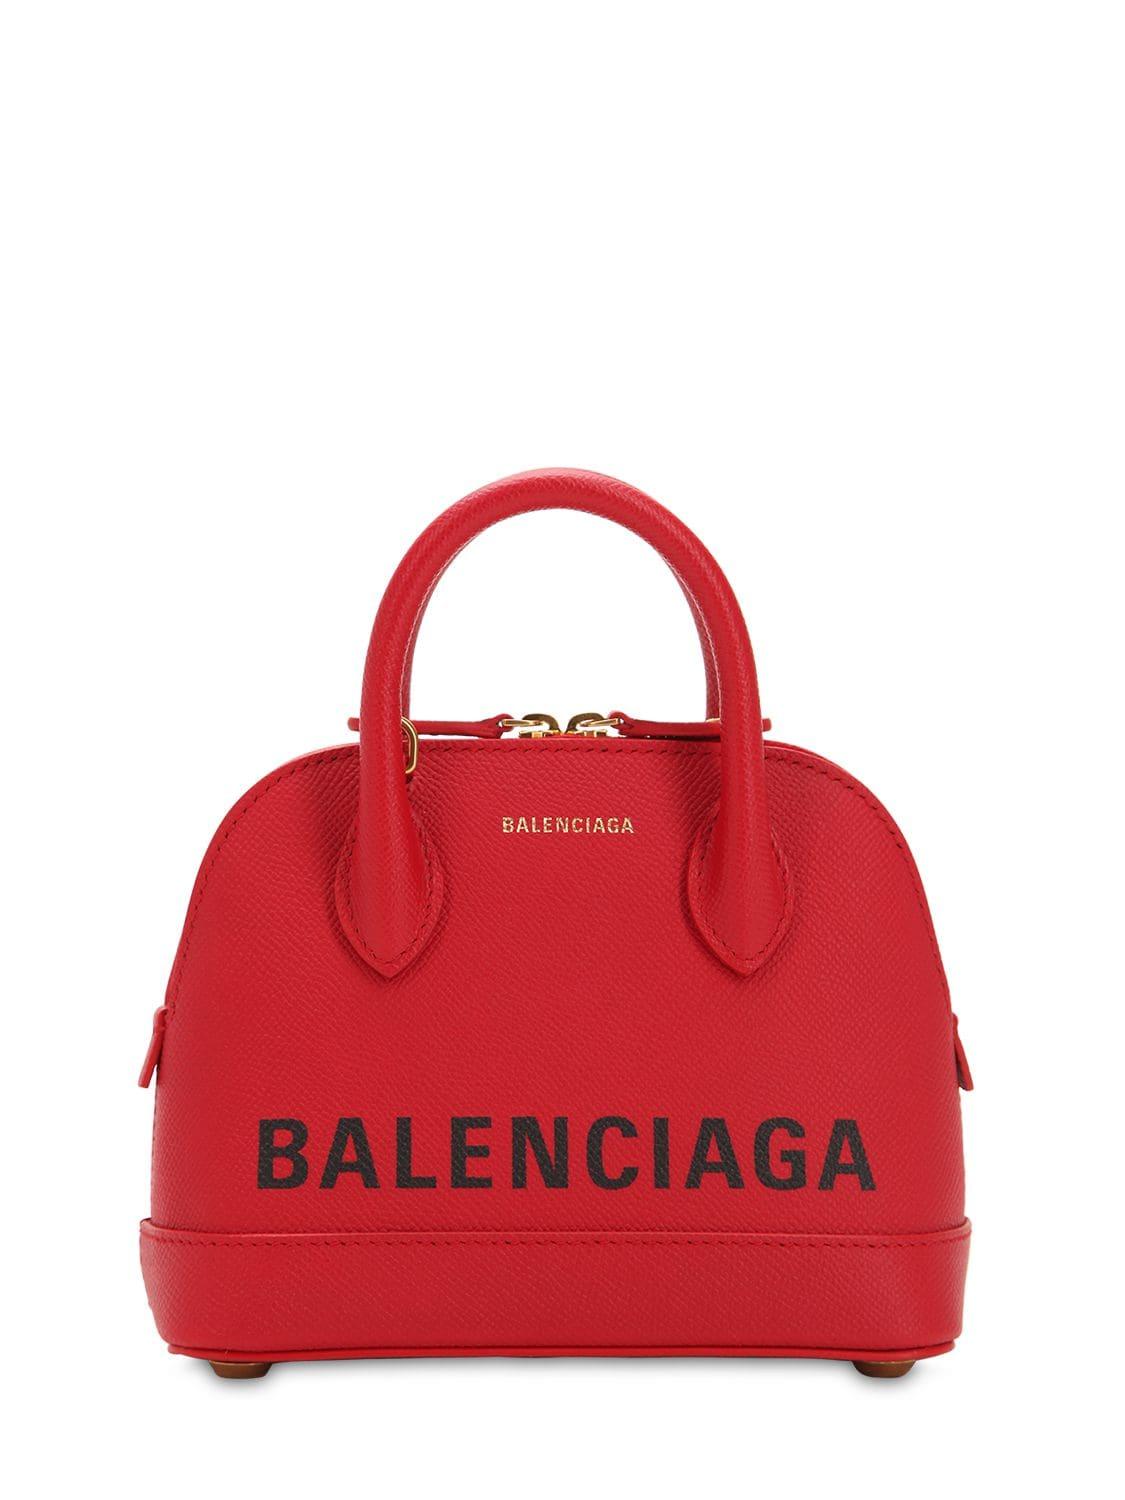 Balenciaga Xxs Ville Top Handle Leather Bag in Red | Lyst